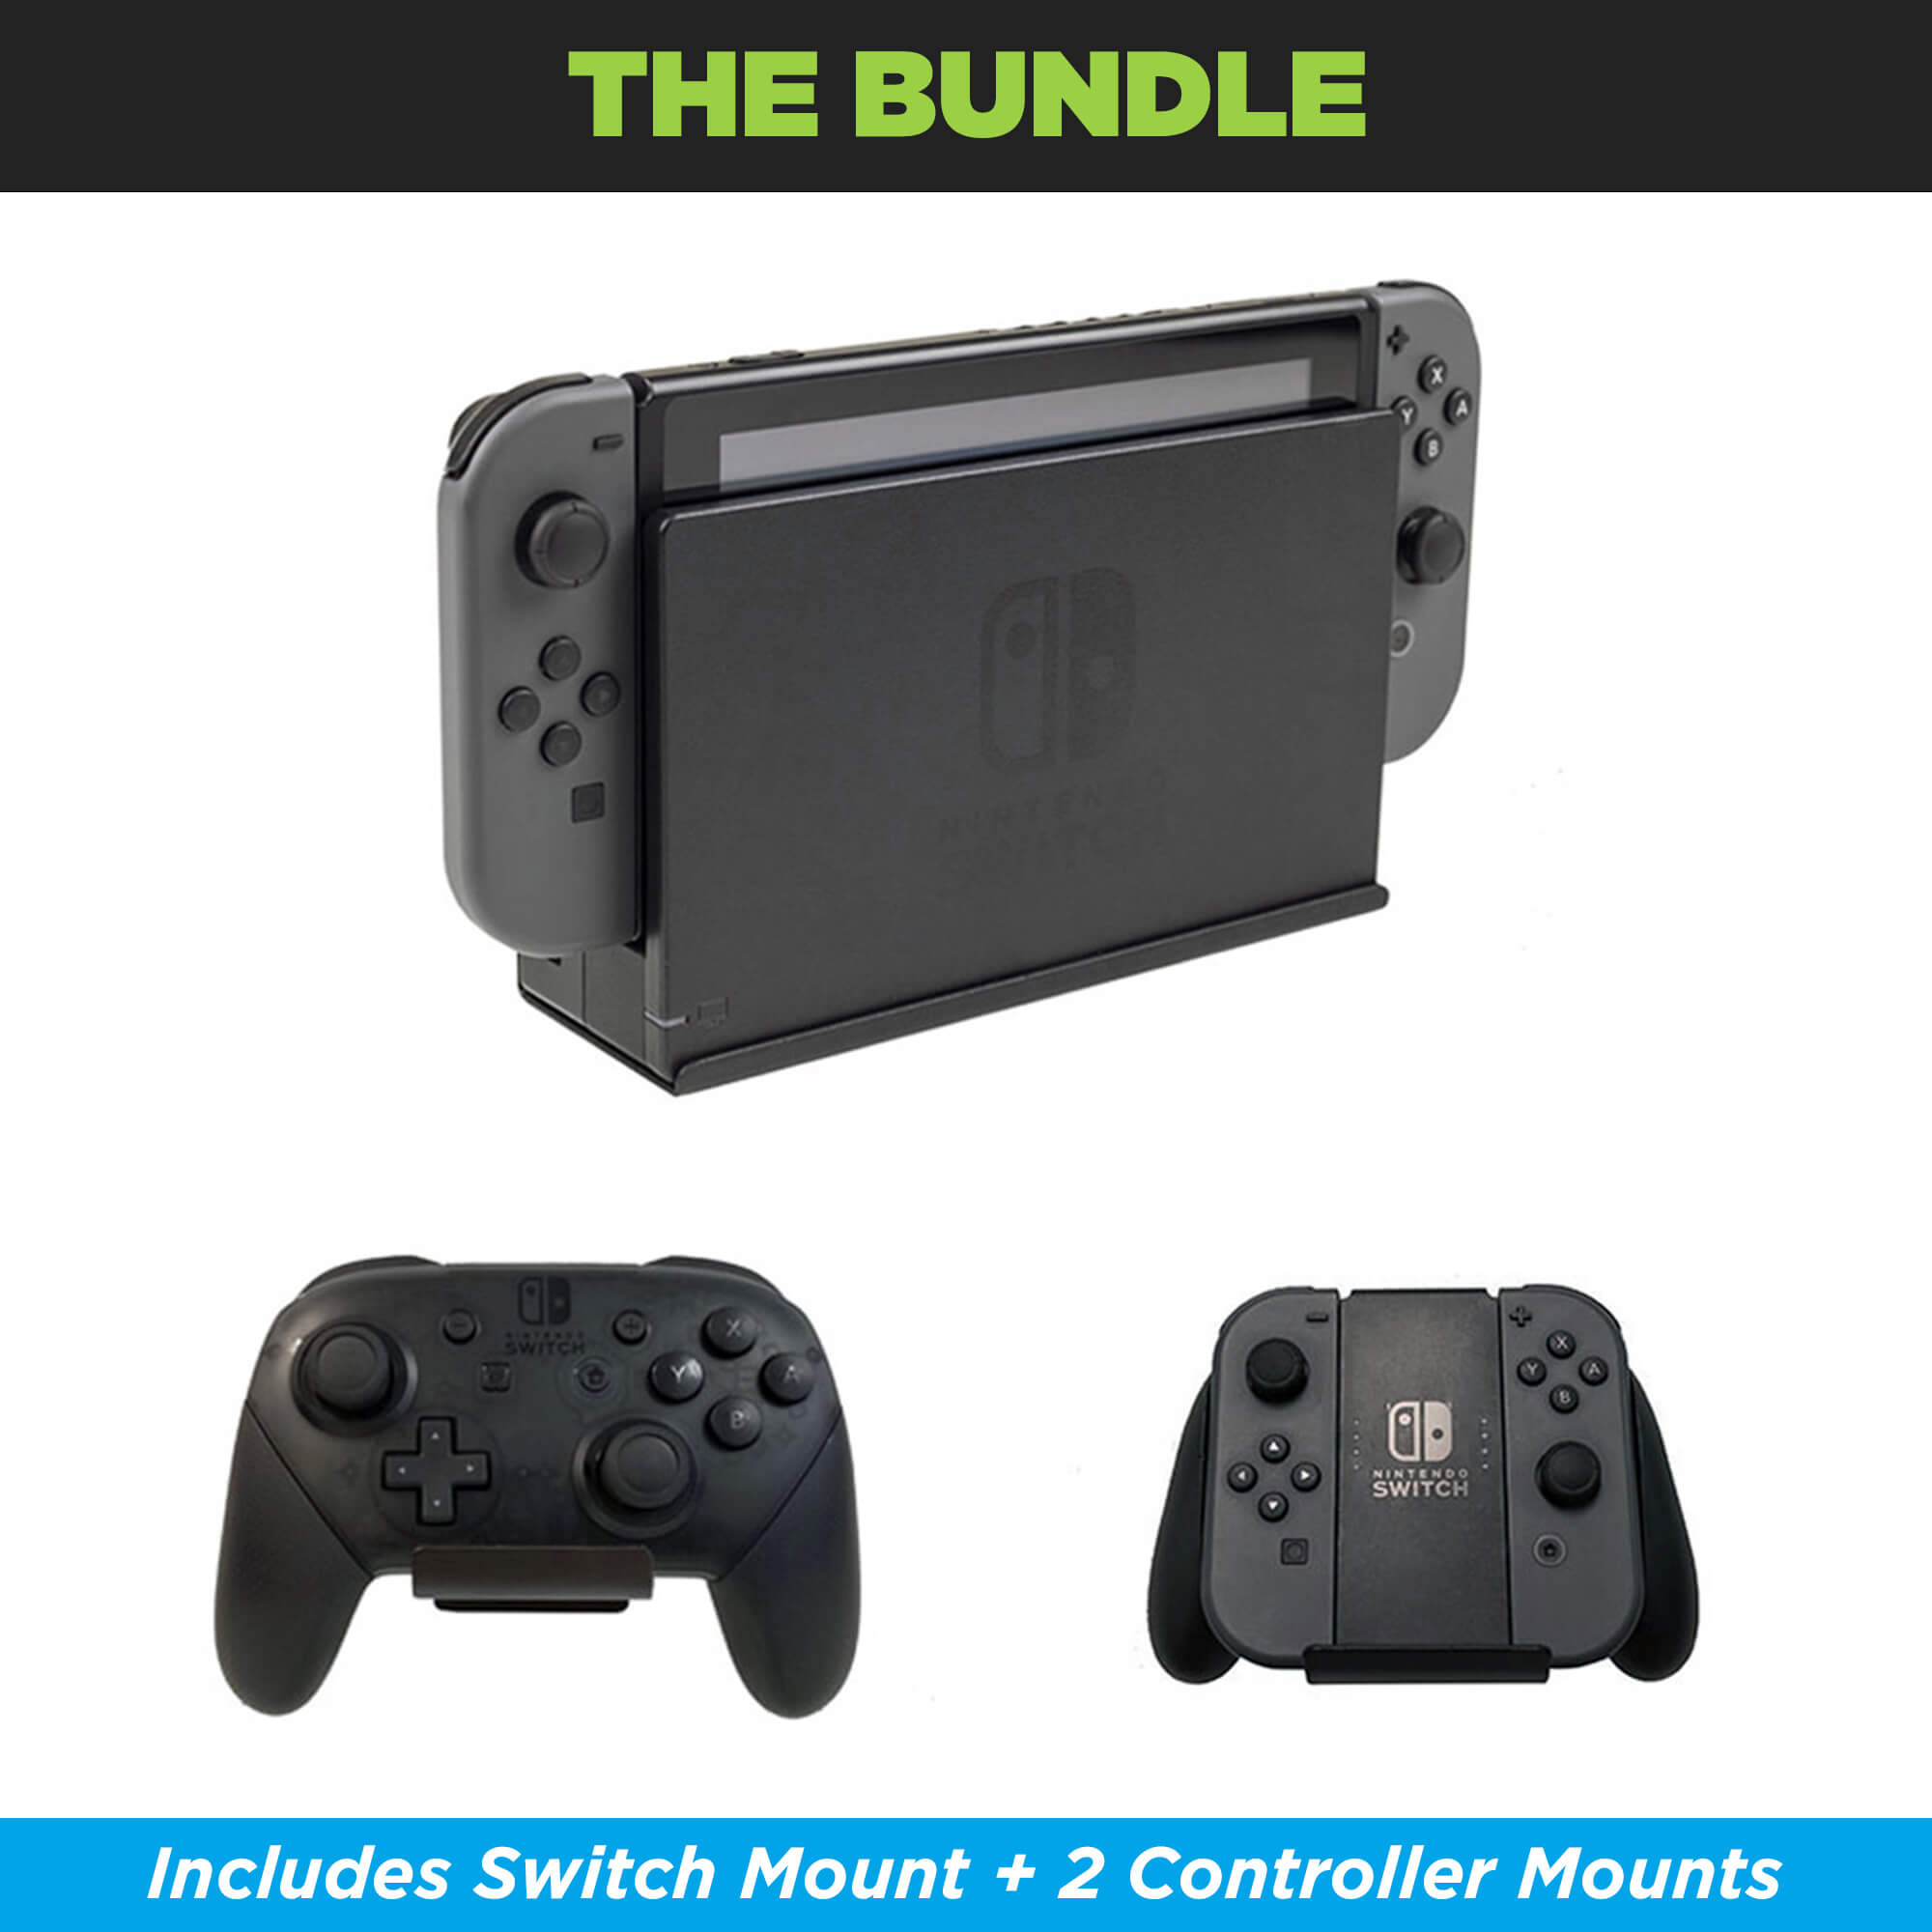 HIDEit Mounts Switch Bundle pack with a Switch wall mount and two controller wall mounts with the Nintendo Switch console, Joy-Con Controllers and Switch Pro Controller.